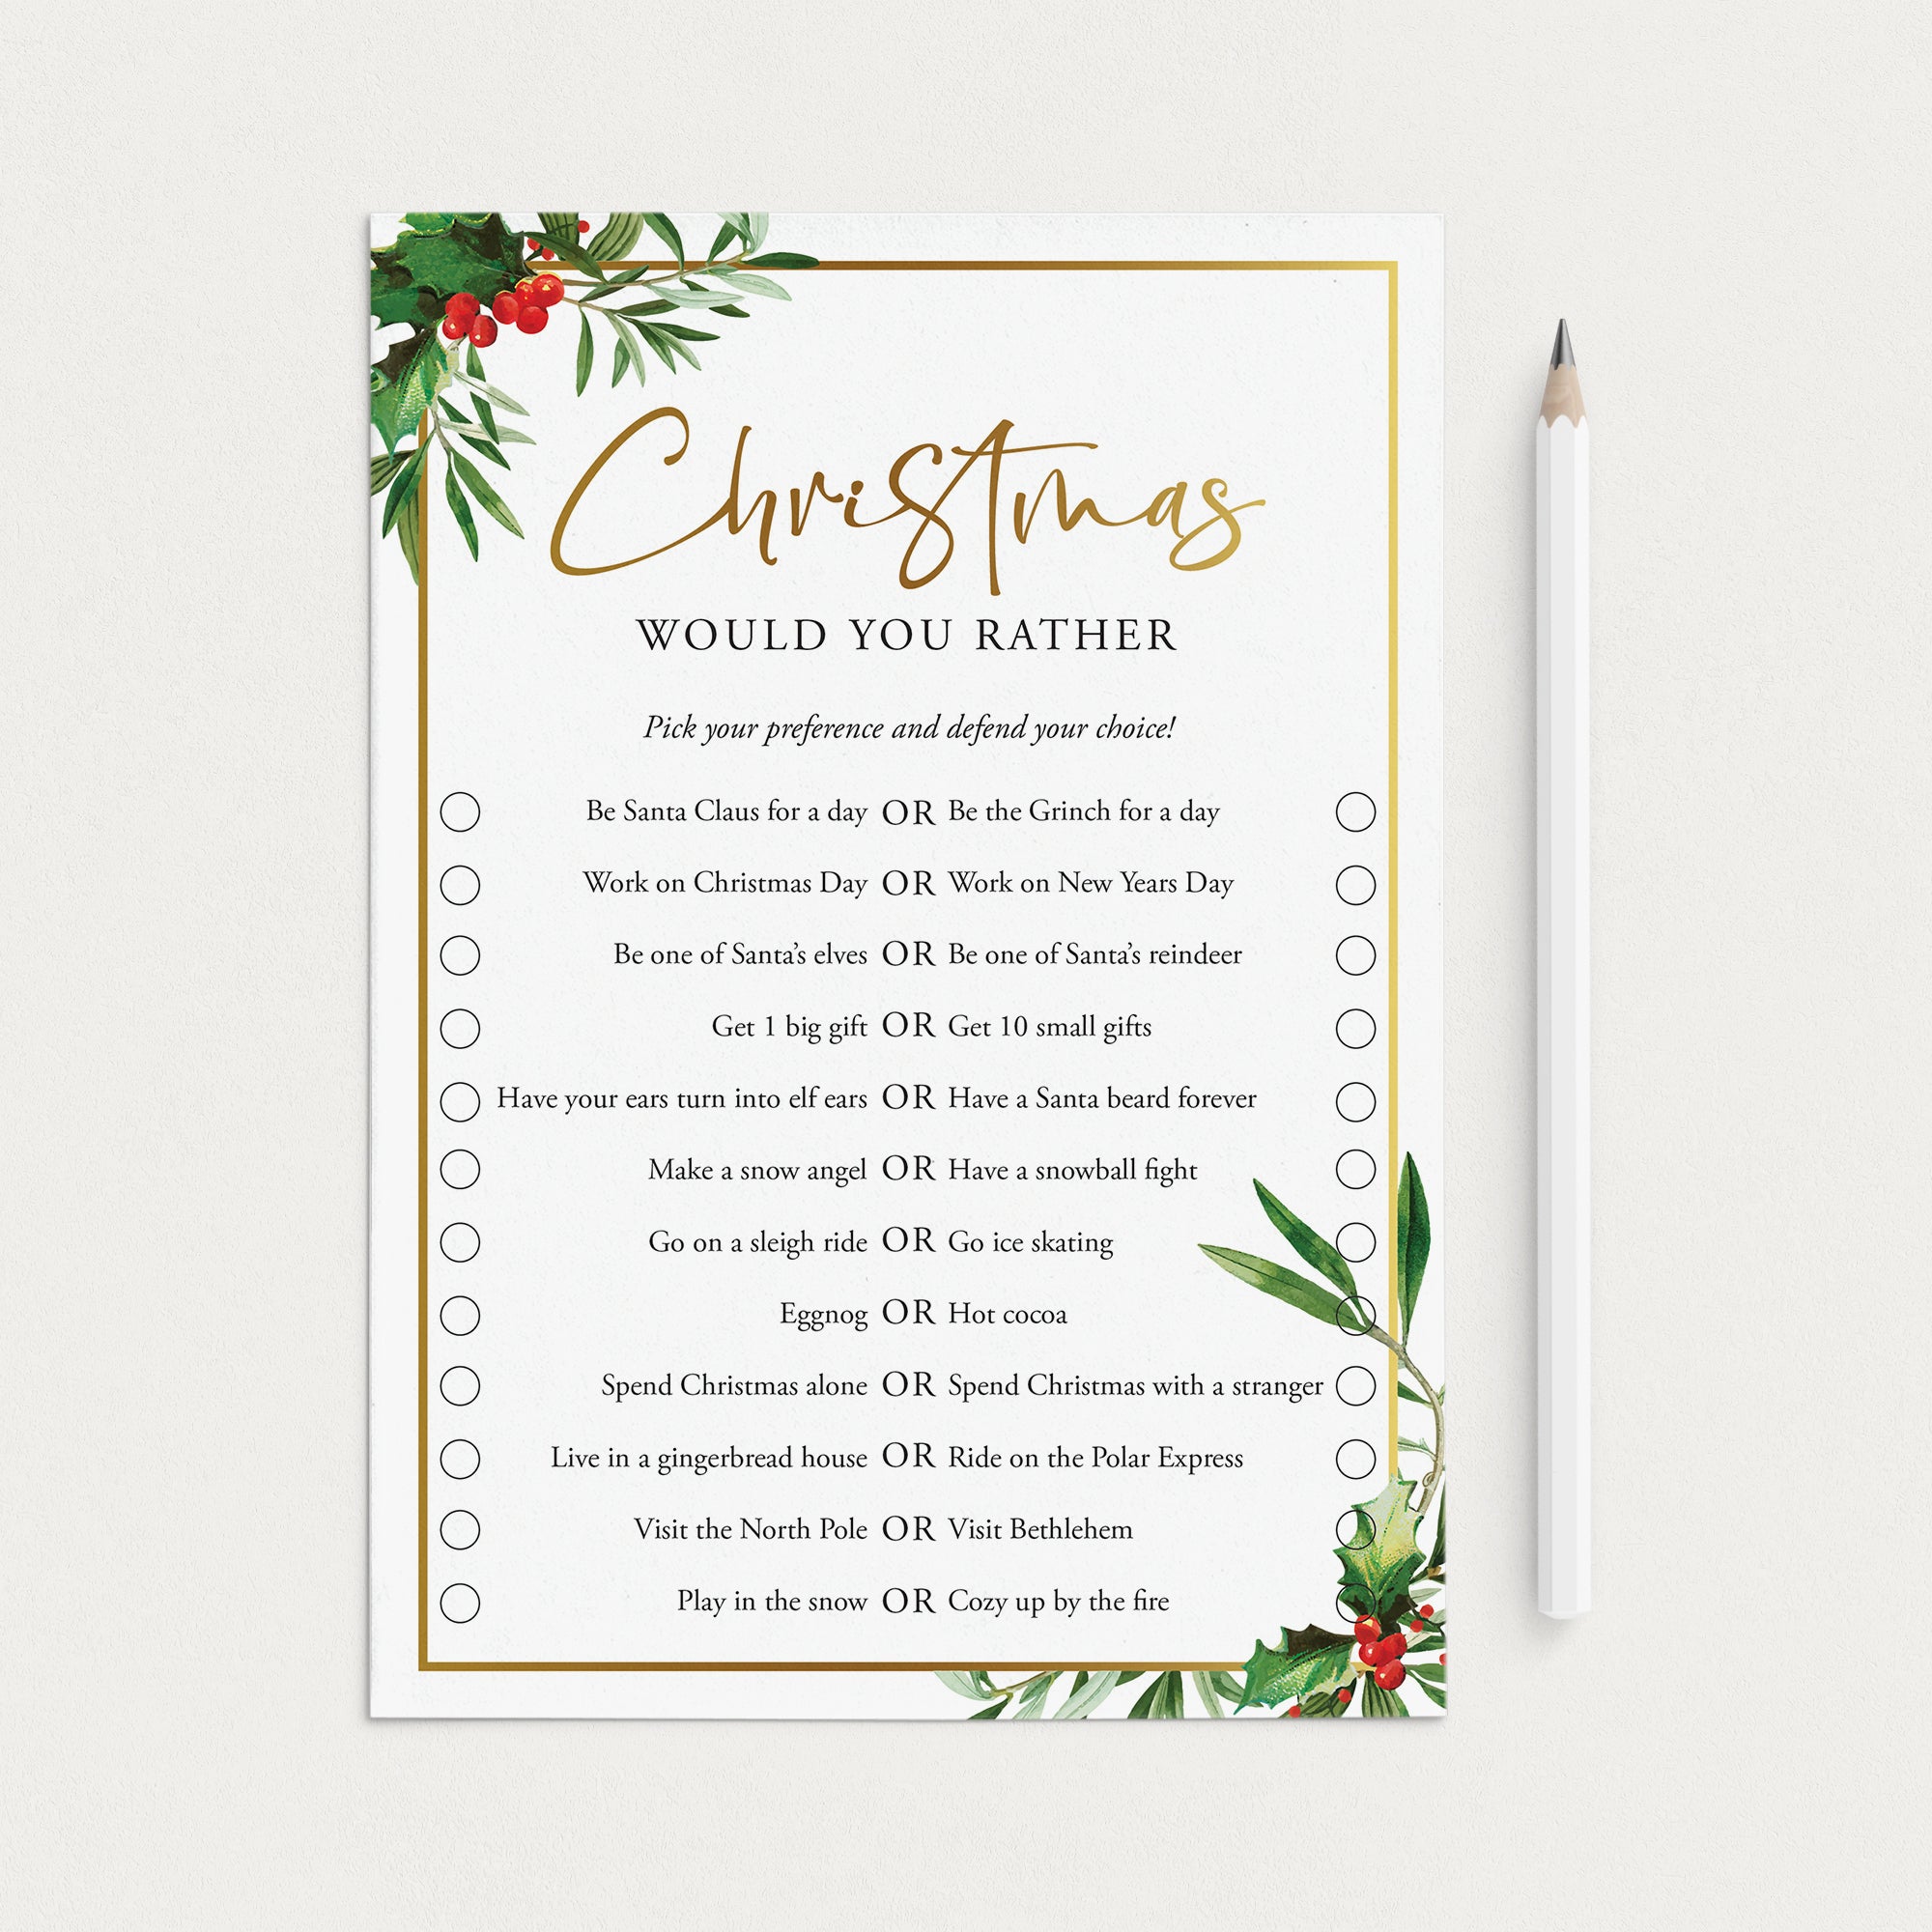 Would You Rather Christmas Questions for Adults Printable by LittleSizzle